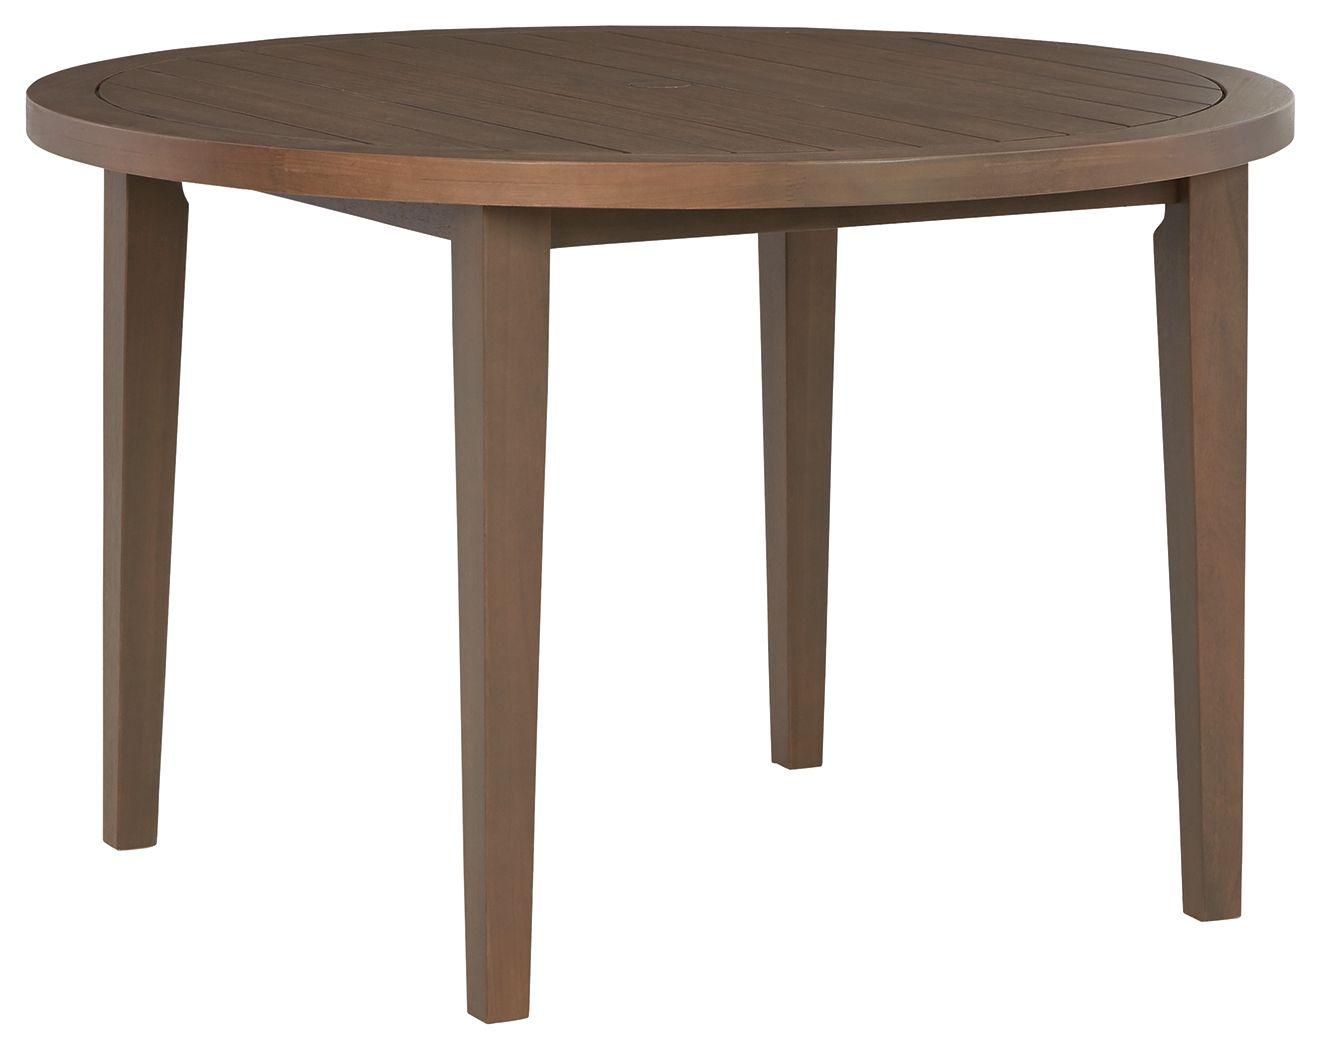 Signature Design by Ashley® - Germalia - Brown - Round Dining Table W/Umb Opt - 5th Avenue Furniture